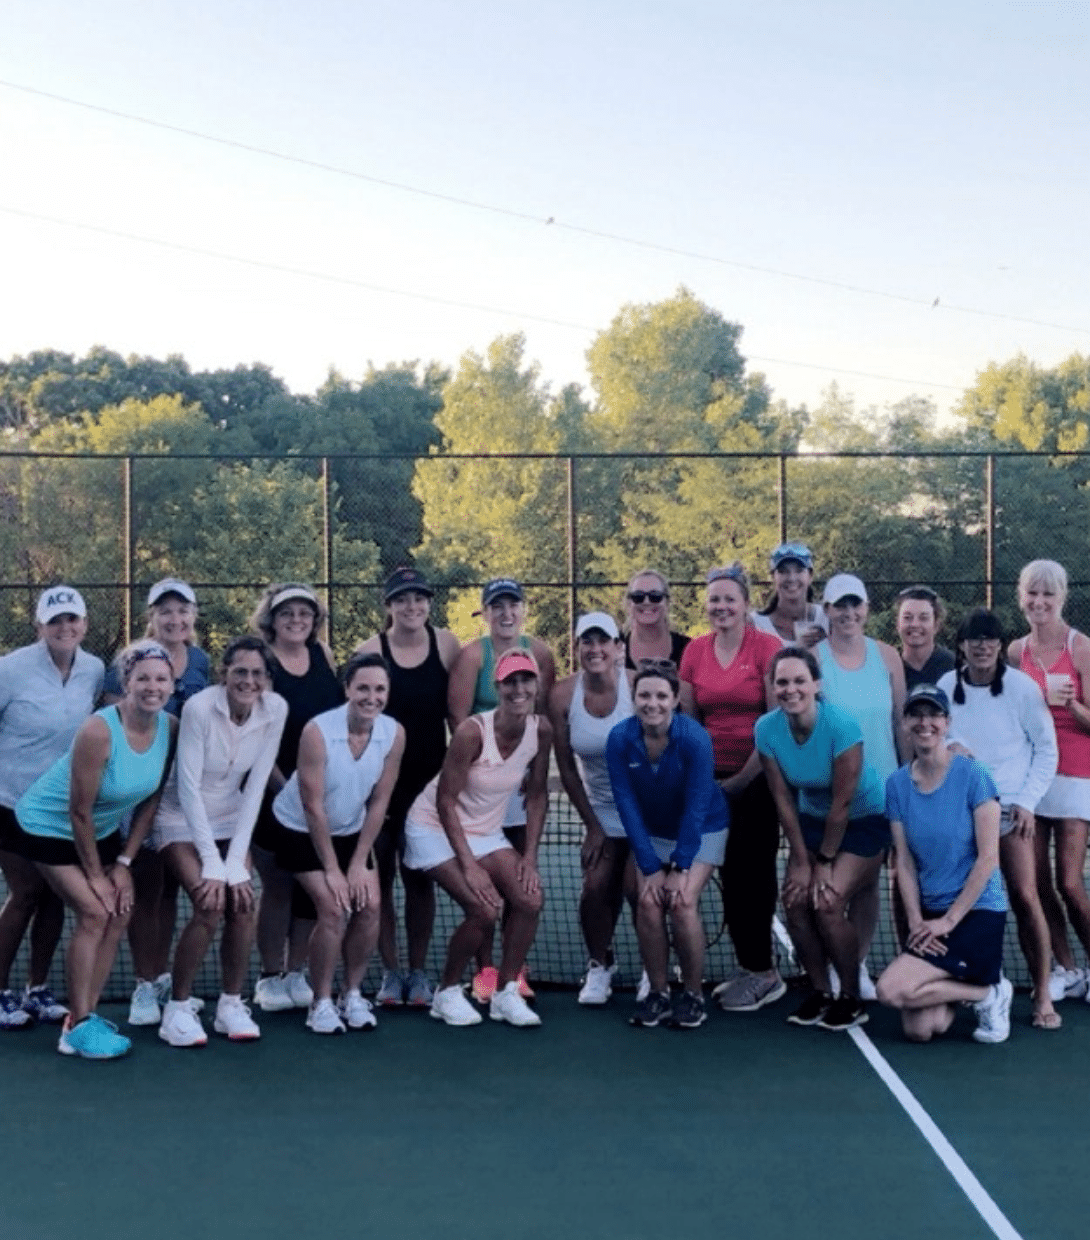 Women's tennis group gathering outside on a tennis court for a photo